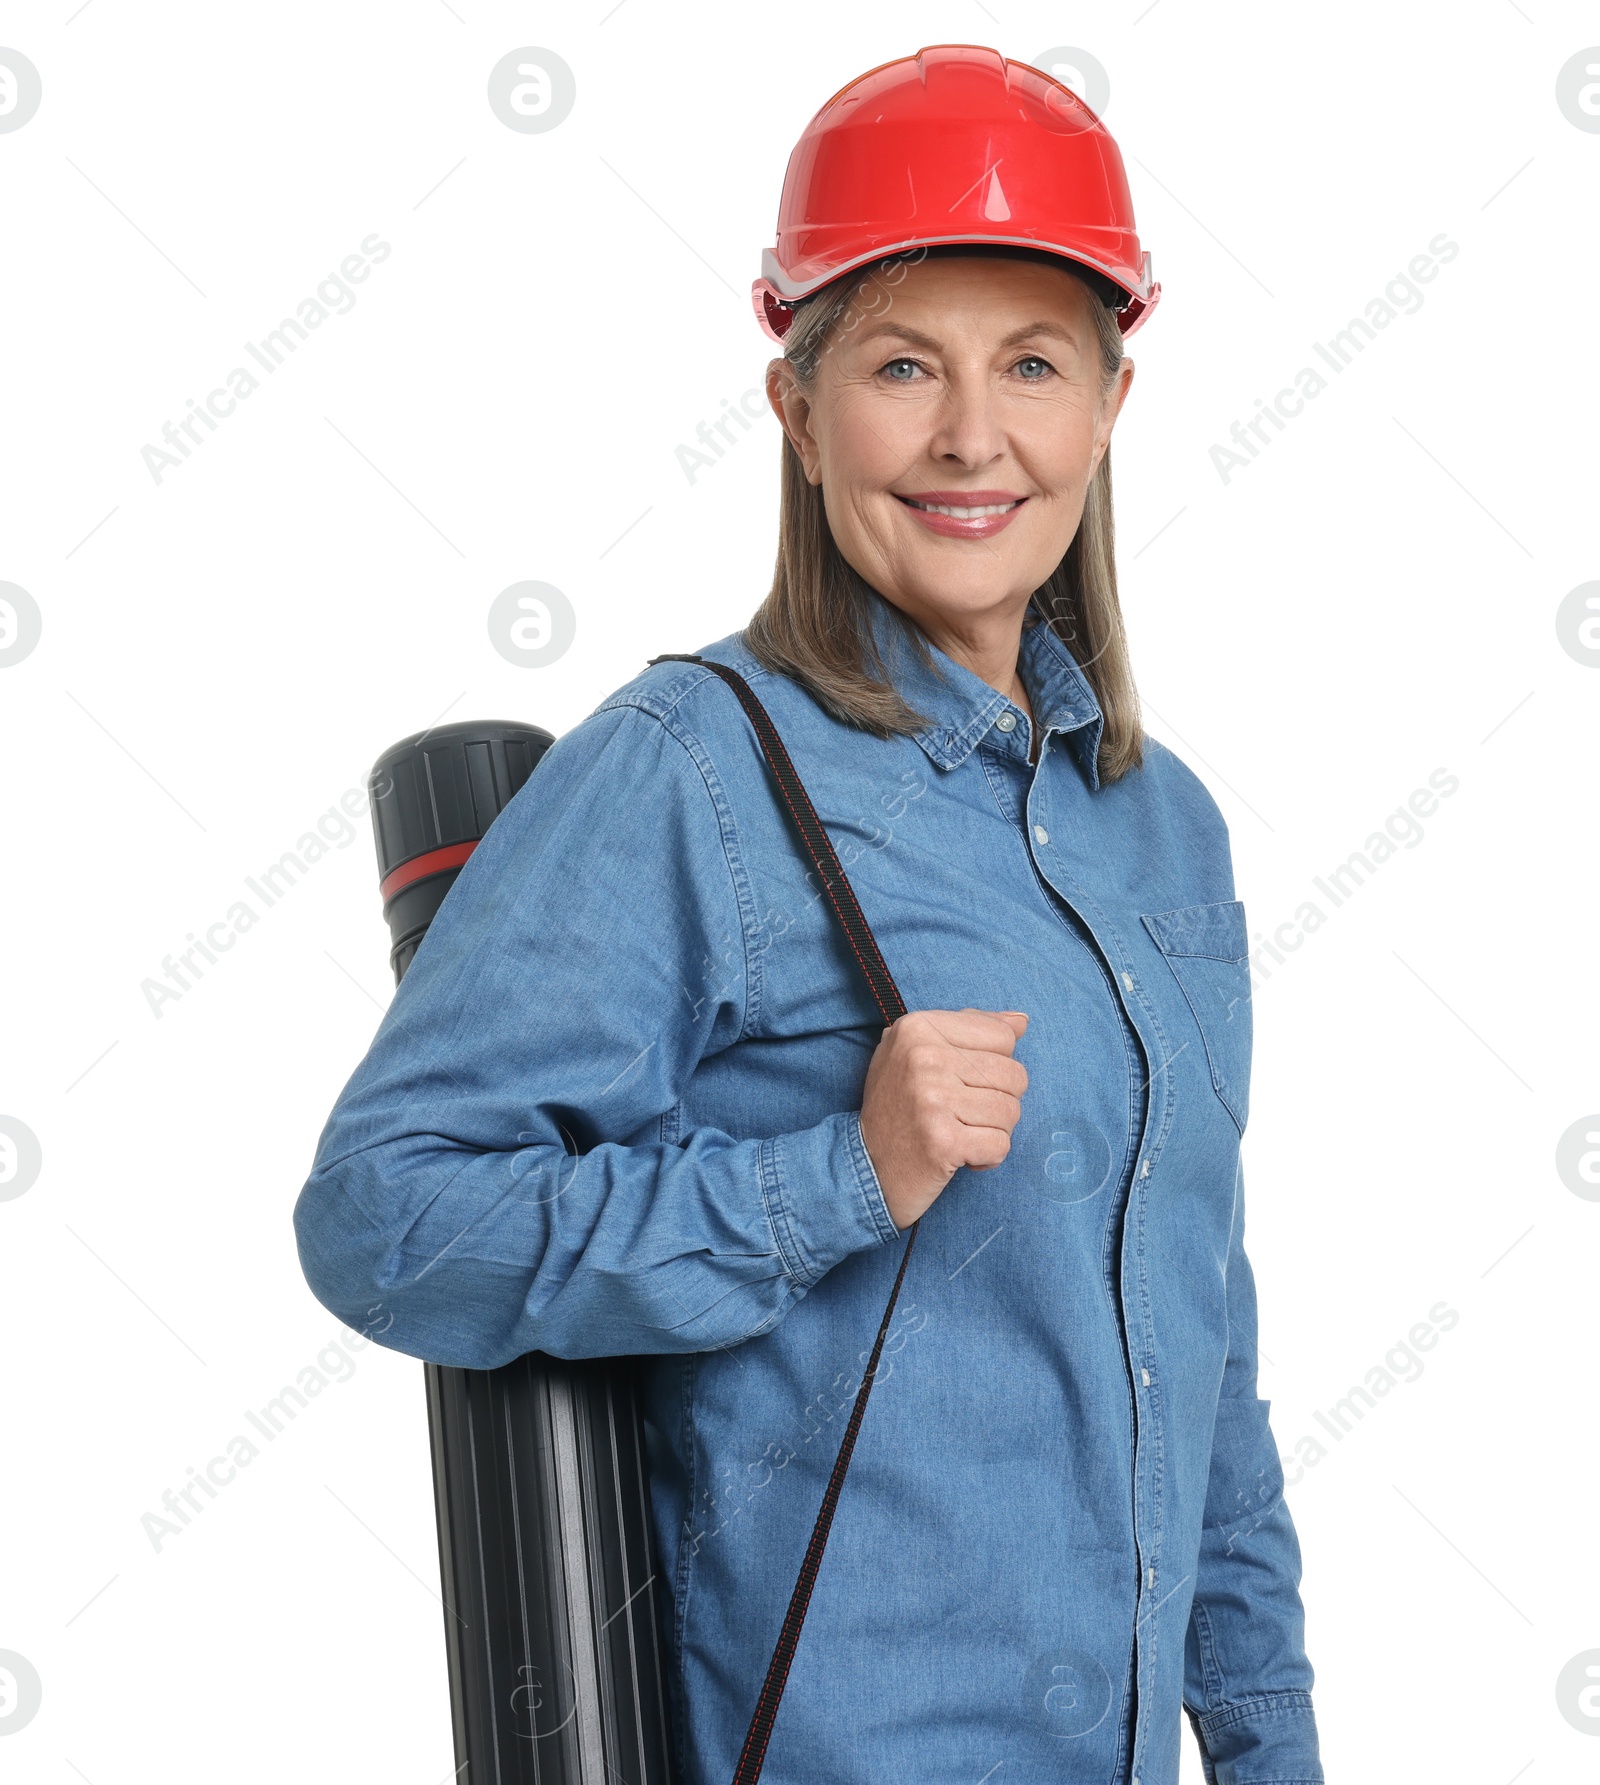 Photo of Architect in hard hat with tube on white background